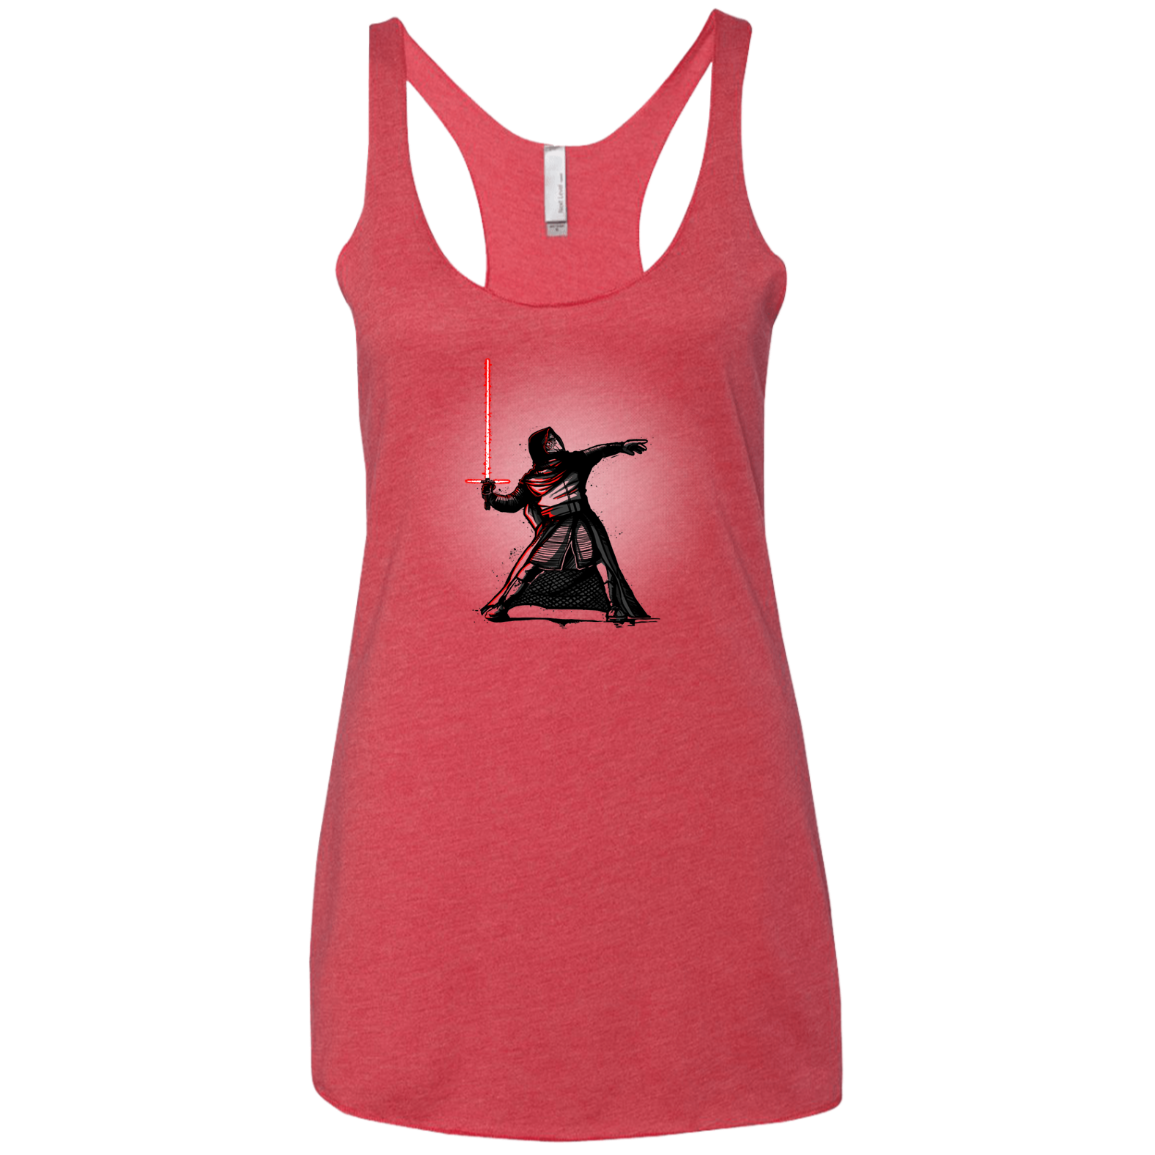 For The Order Women's Triblend Racerback Tank